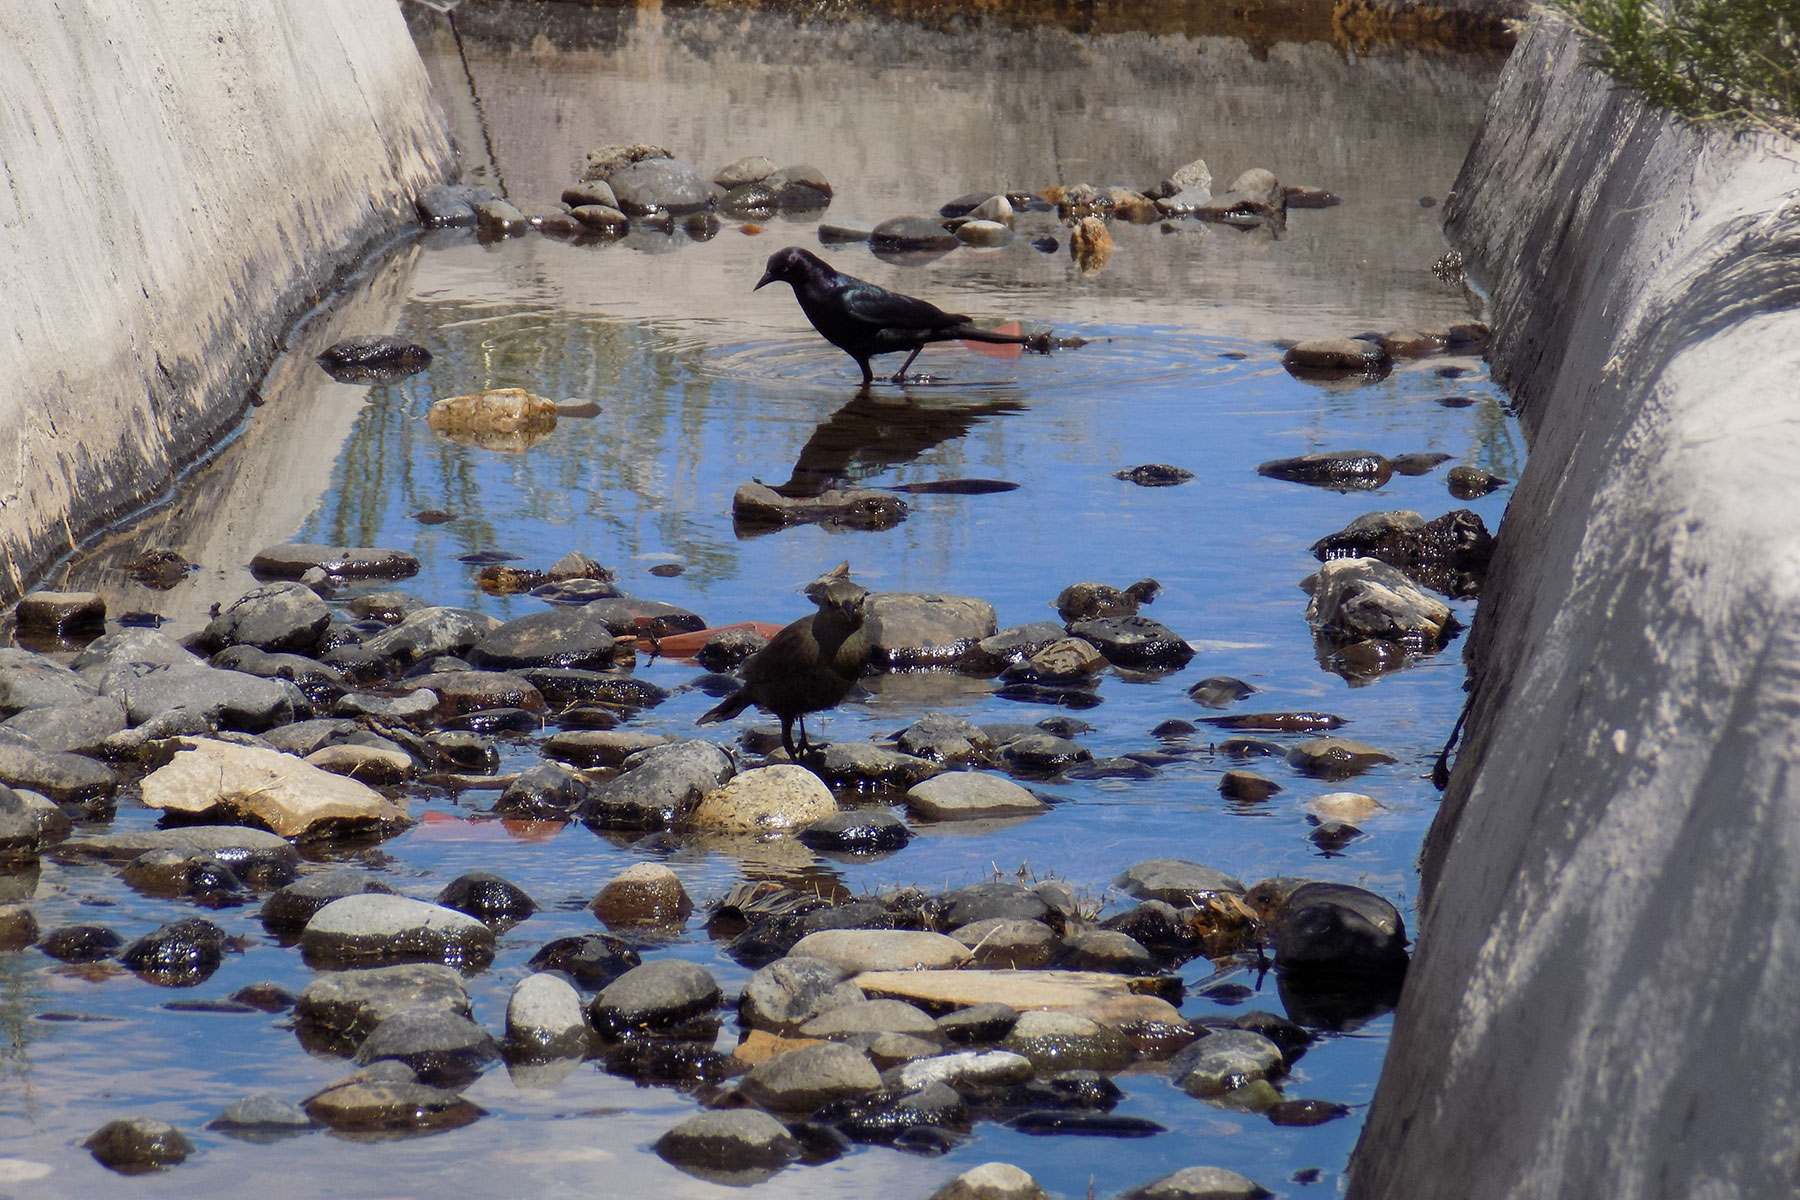 Two black birds stand on rocks within a concrete-lined stream bed.